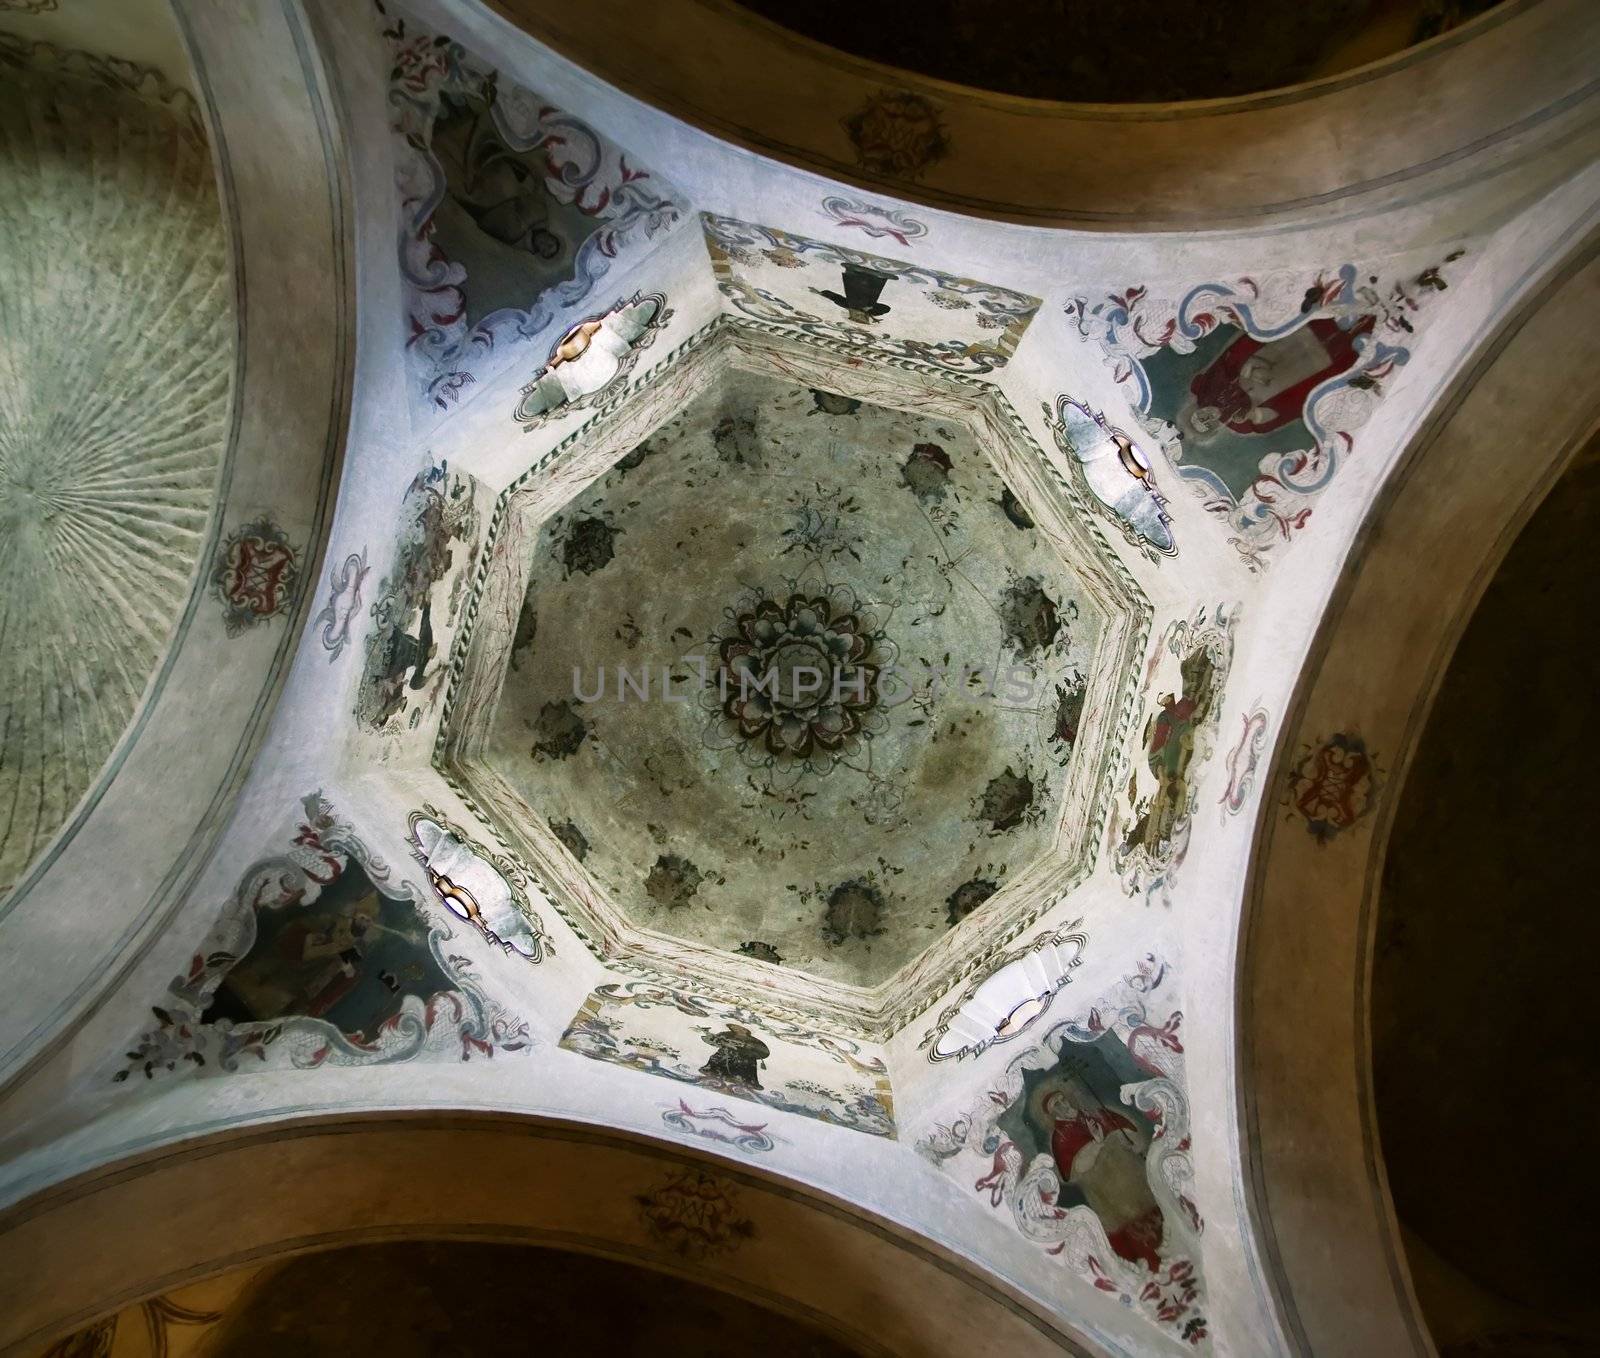 Ceiling in Hispanic Mission Church by Creatista